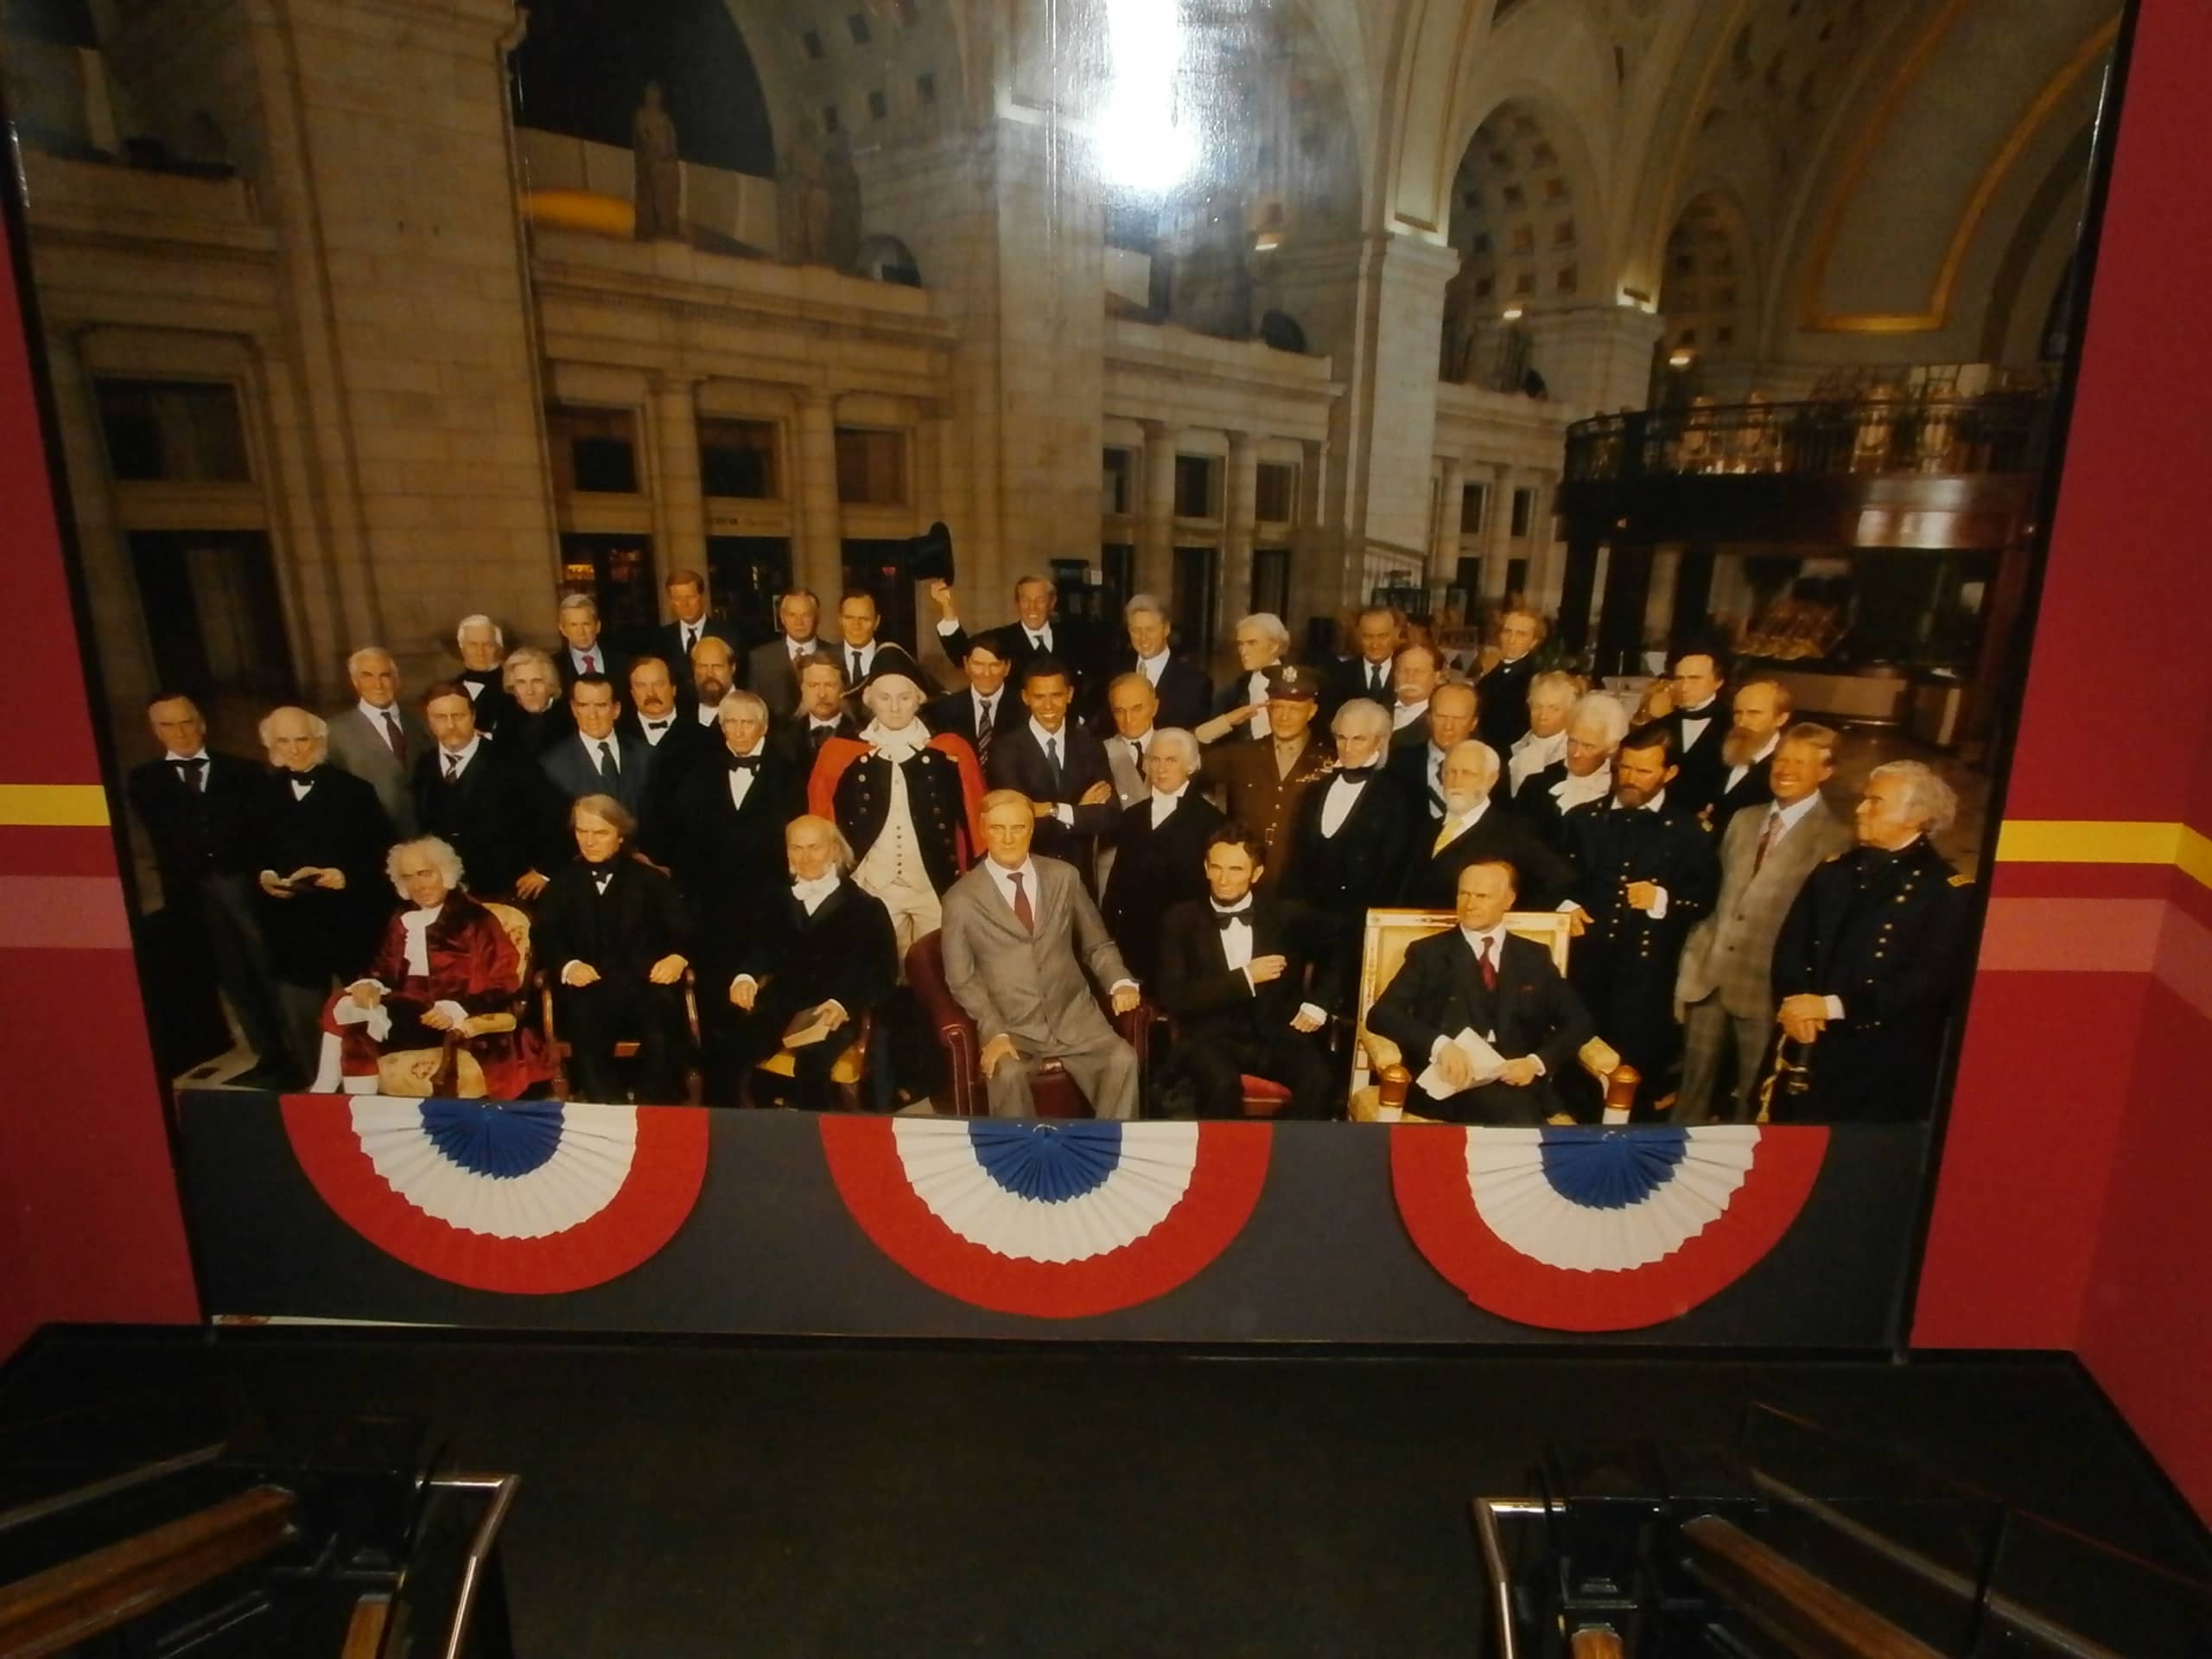 Presidents grouped together for a picture at Madame Tussauds Wax Museum in Washington DC